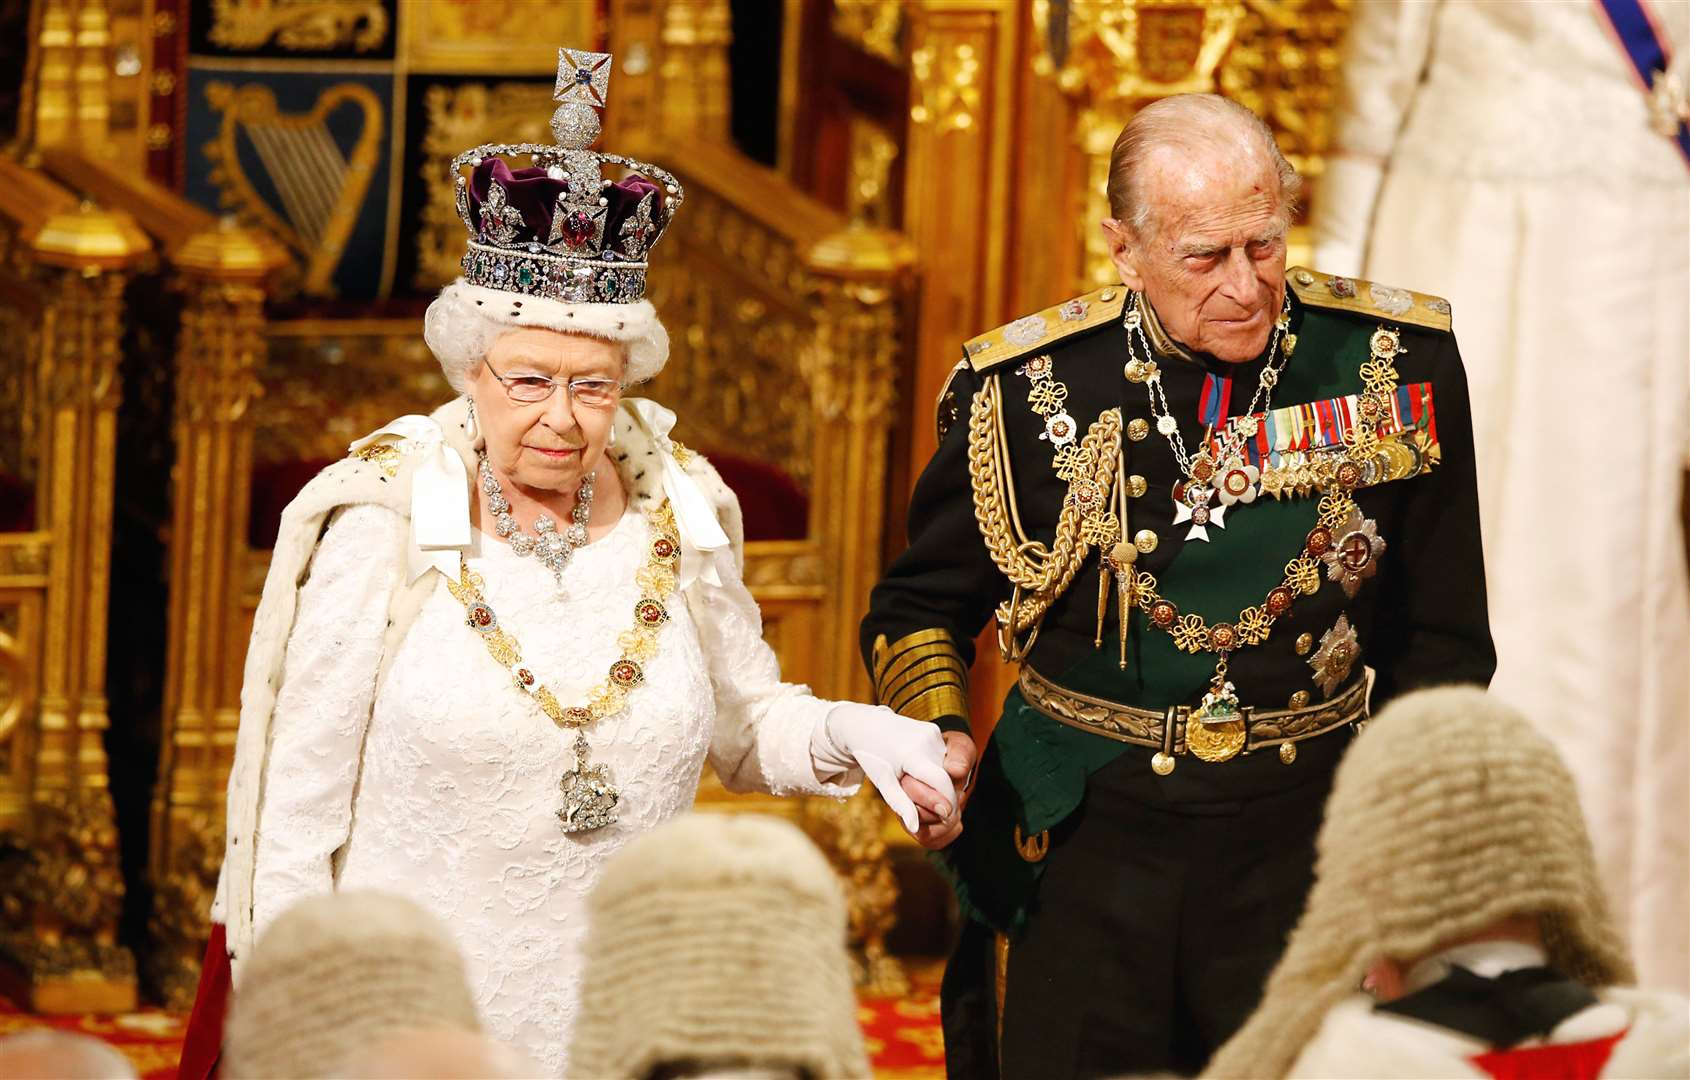 The Queen with the Duke of Edinburgh during the State Opening in 2016 (Alastair Grant/The Sun/PA)